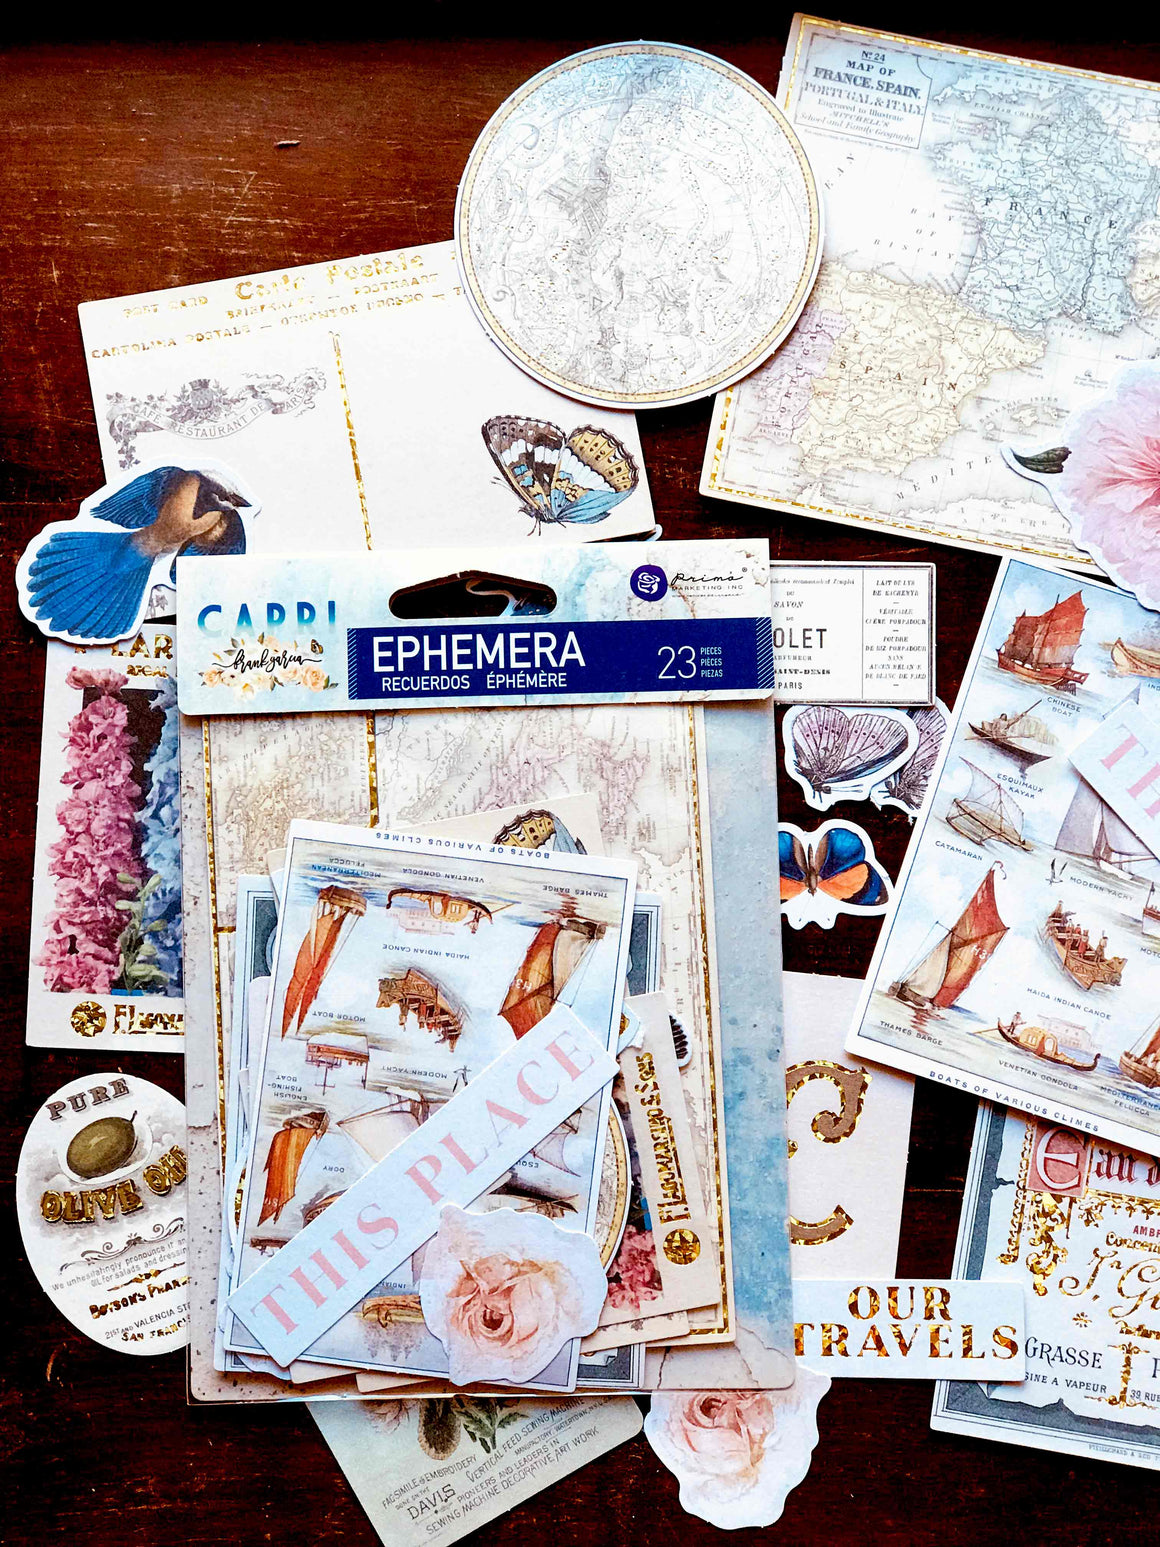 Capri Ephemera Die Cuts with Foil Accents - Prima from micmoc.com at Mic Moc